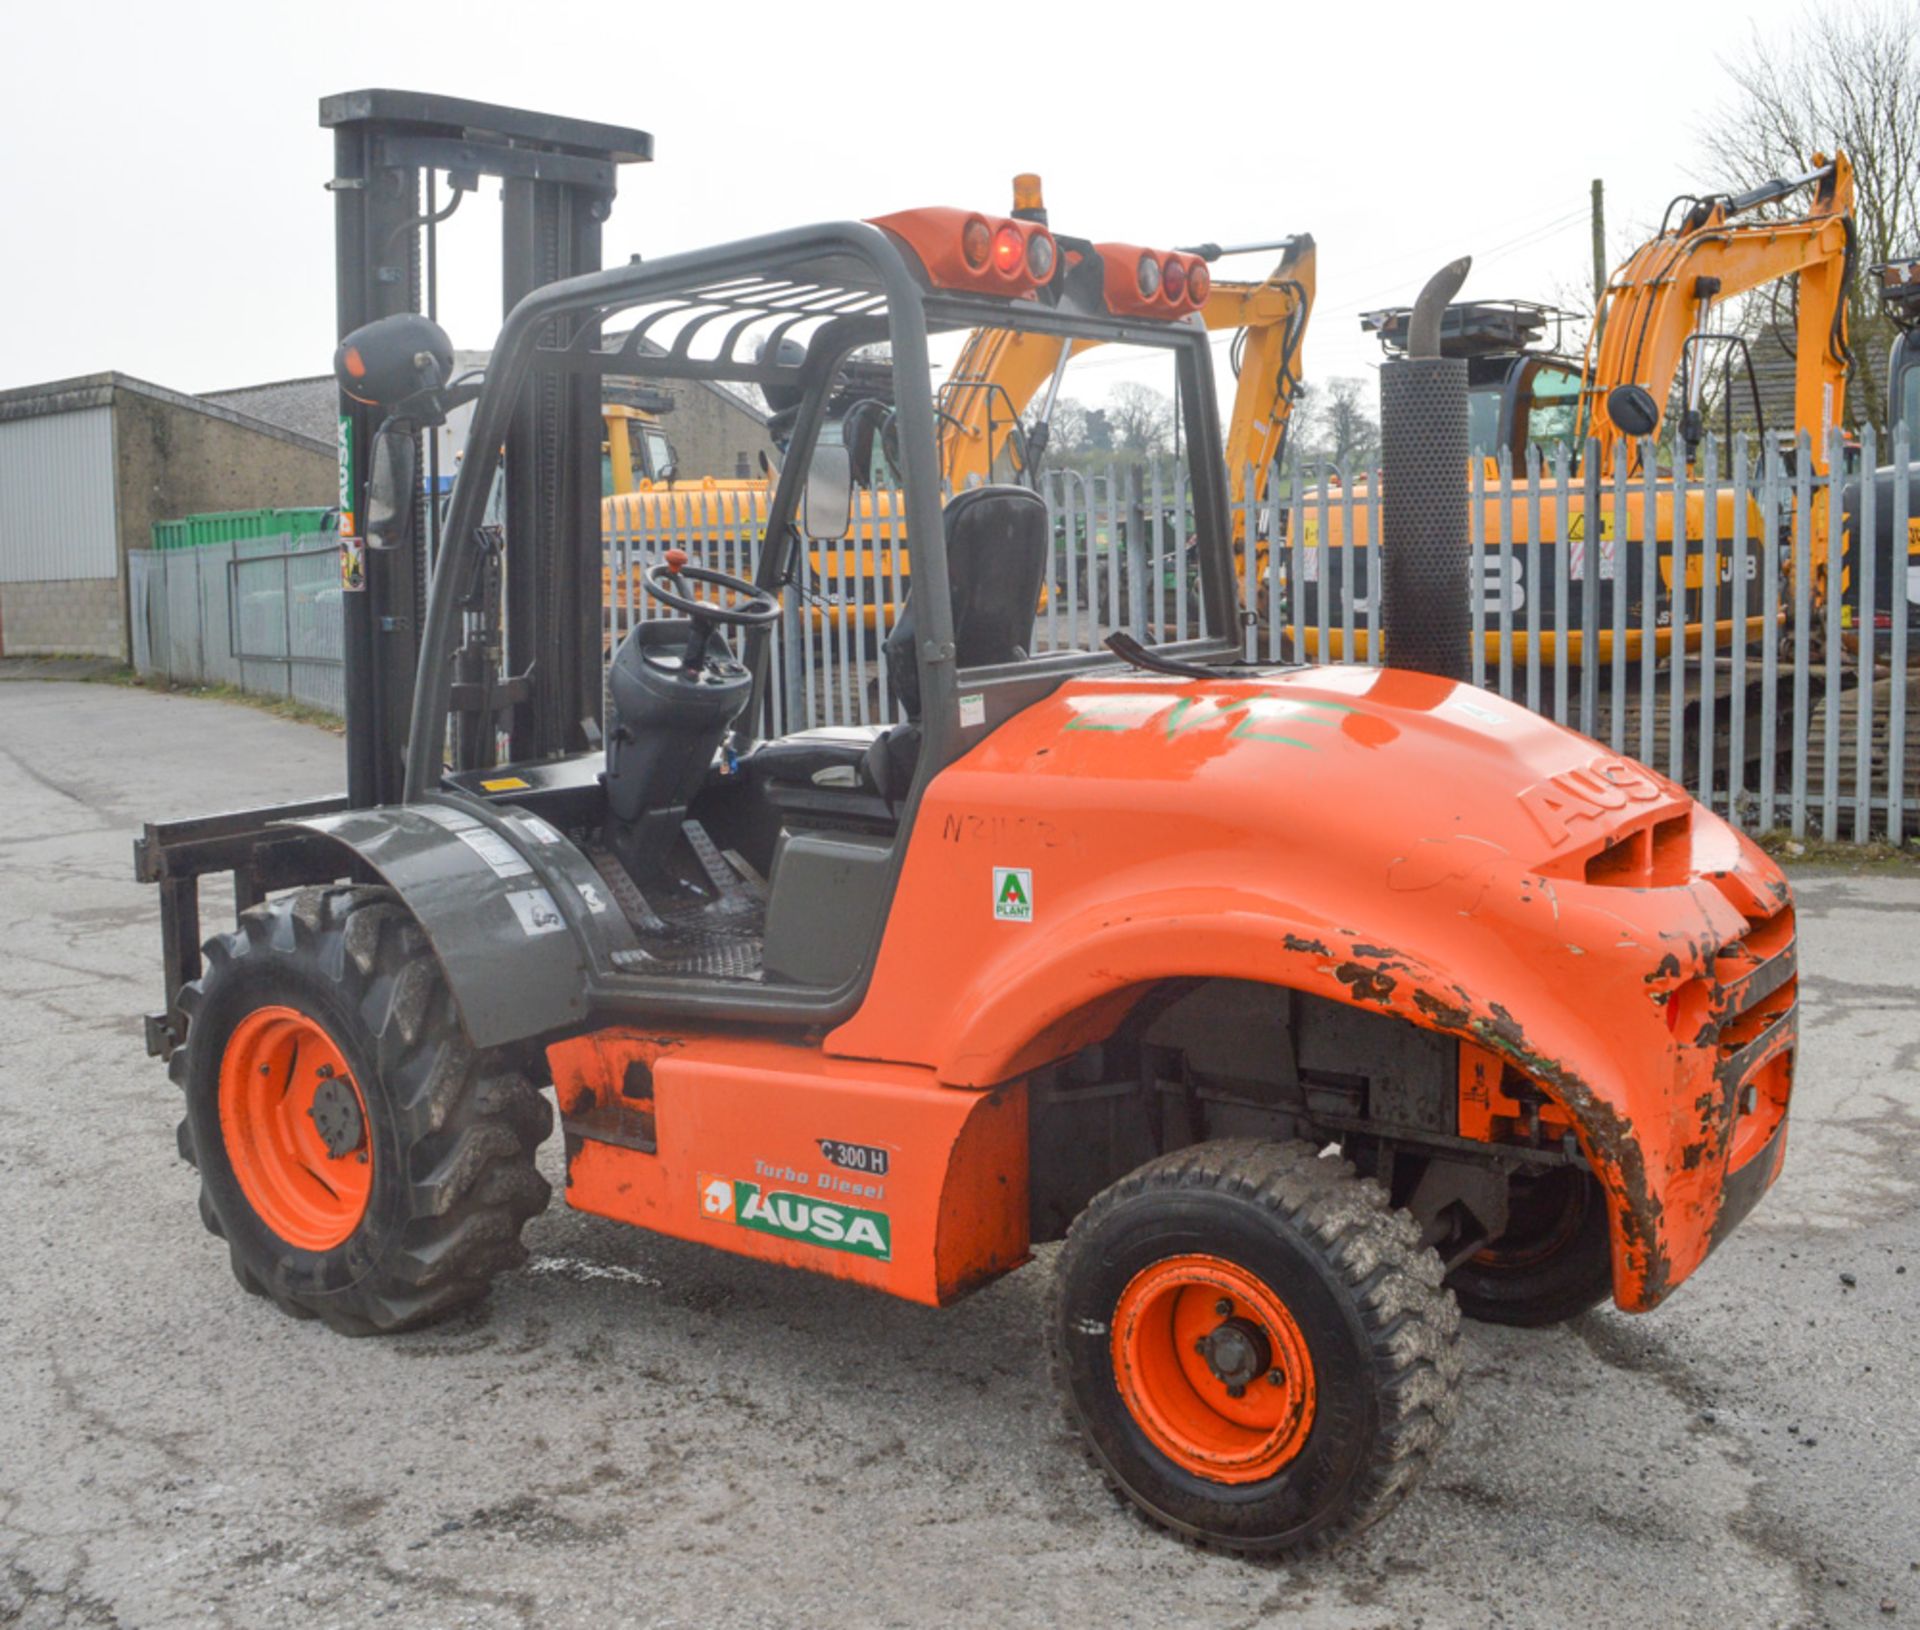 Ausa C300H 3 tonne diesel driven fork lift truck Year: 2007 S/N: 57055614 Recorded Hours: 2805 - Image 2 of 12